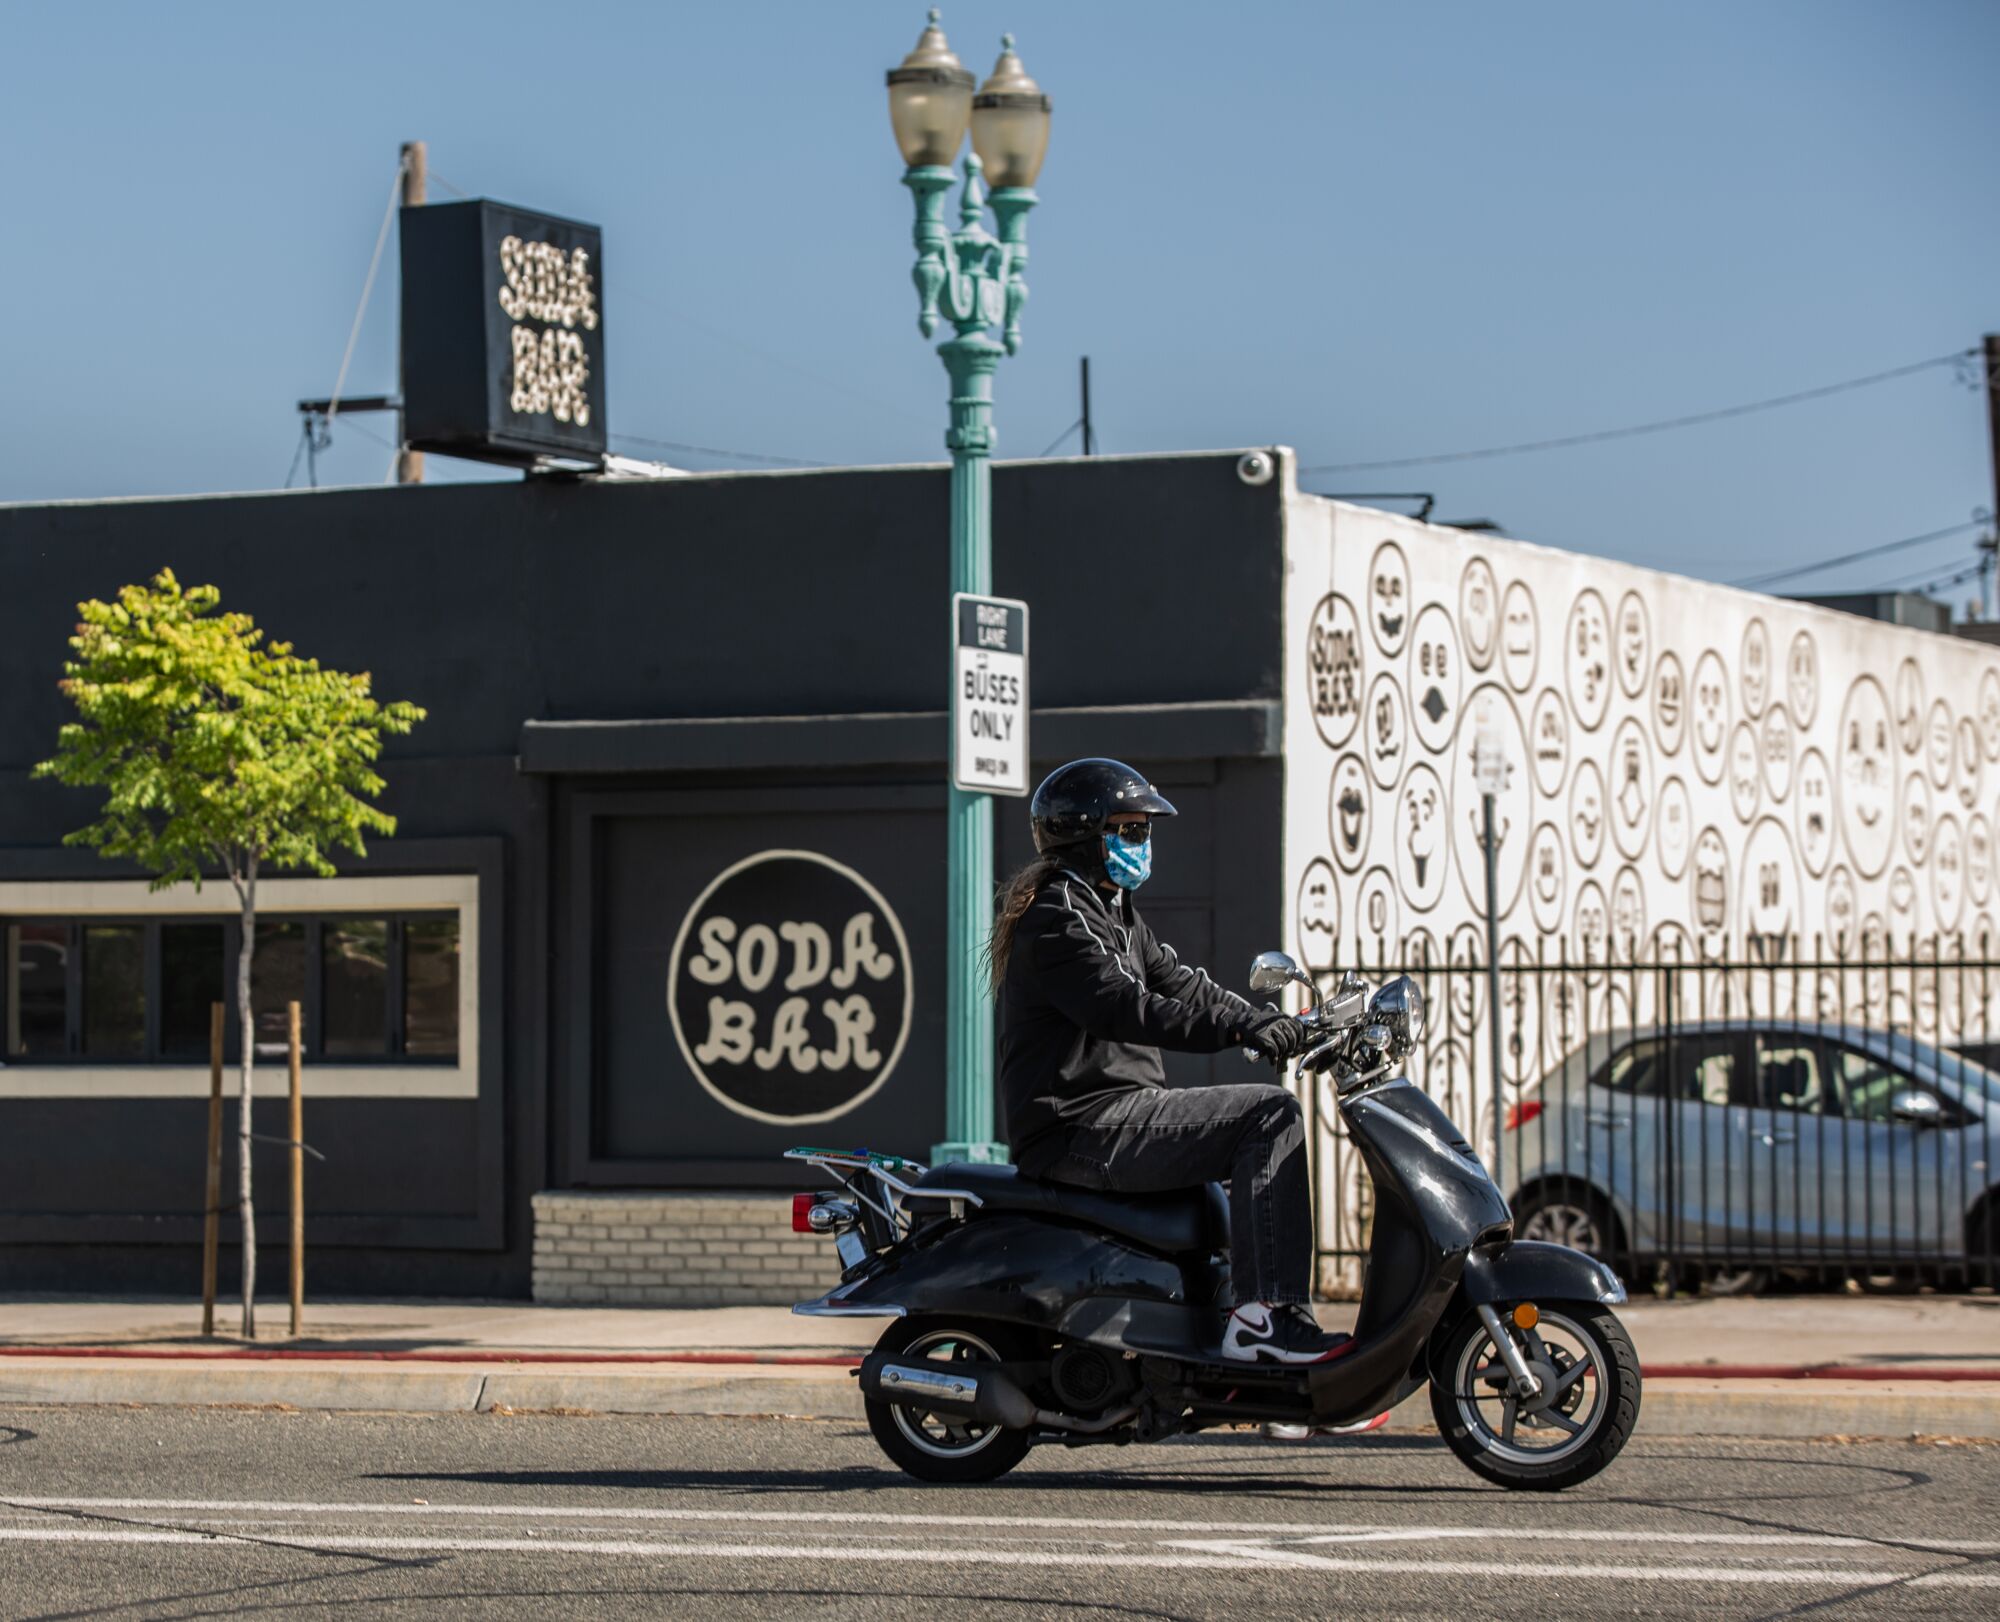 A moped rider wearing a mask drives past Soda Bar in City Heights, one of the many music venues that will be closed for the foreseeable future due to COVID-19 on May 14, 2020 in San Diego, California.